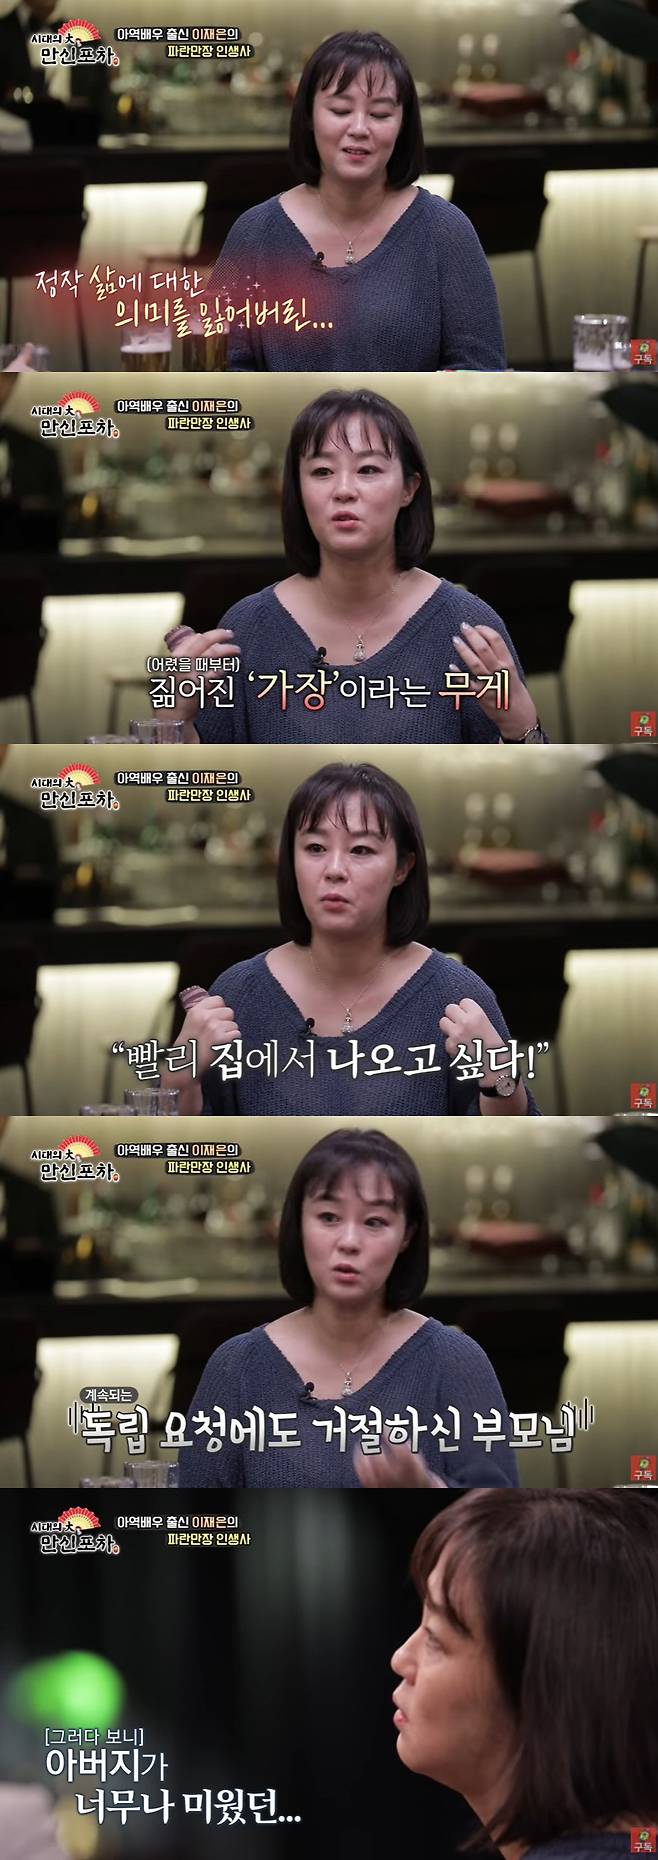 I looked back at the marriage that Jae Eun Lee chose to escape reality.On the 27th, YouTube channel Bae Chan Entertainment web entertainment Manshin Foa actor Jae Eun Lee appeared as a guest.The assistant national sister Jae Eun Lee said of the recent situation, I want to have a fixed program, he said, I will star in the short film drama and perform in Alba style.I still do not feel happy, said Jae Eun Lee, who has been in charge of the family since childhood.I have never thought about what I am happy about when I am a child. Jae Eun Lee, who forced adult films to appear in order to take charge of the house and escaped from the reality of marriage, said, I thought it was a way to finish this.I didnt want to be a burden. I wanted to make a living, do something to my parents, get out of this house.I asked him to be independent, but he said he could not live alone. So Jae Eun Lee said, I thought I could live like that, but I do not want to show my family how to live well.And a year after the marriage, my father died, said Jae Eun Lee, who contacted her mother seven to eight years after the divorce. (To my mother) I said, Its so hard, but I dont know what to run for again, said Jae Eun Lee.I am sorry that I can not help you while I am in the sky, he said. I have been living with my mother since then. Now my mother is next to me and lives for my mother.One man revealed that Jae Eun Lee would divorce even if she married; Jae Eun Lee did not live like a person for 10 years of marriage.Ive been so depressed Ive been dying for three or four years, and Ive been counseled and drugged, and Im glad I dont think about it, but I dont know what Im going to do.When I woke up, I opened the veranda door and leaned on it. I was afraid after a few times. 